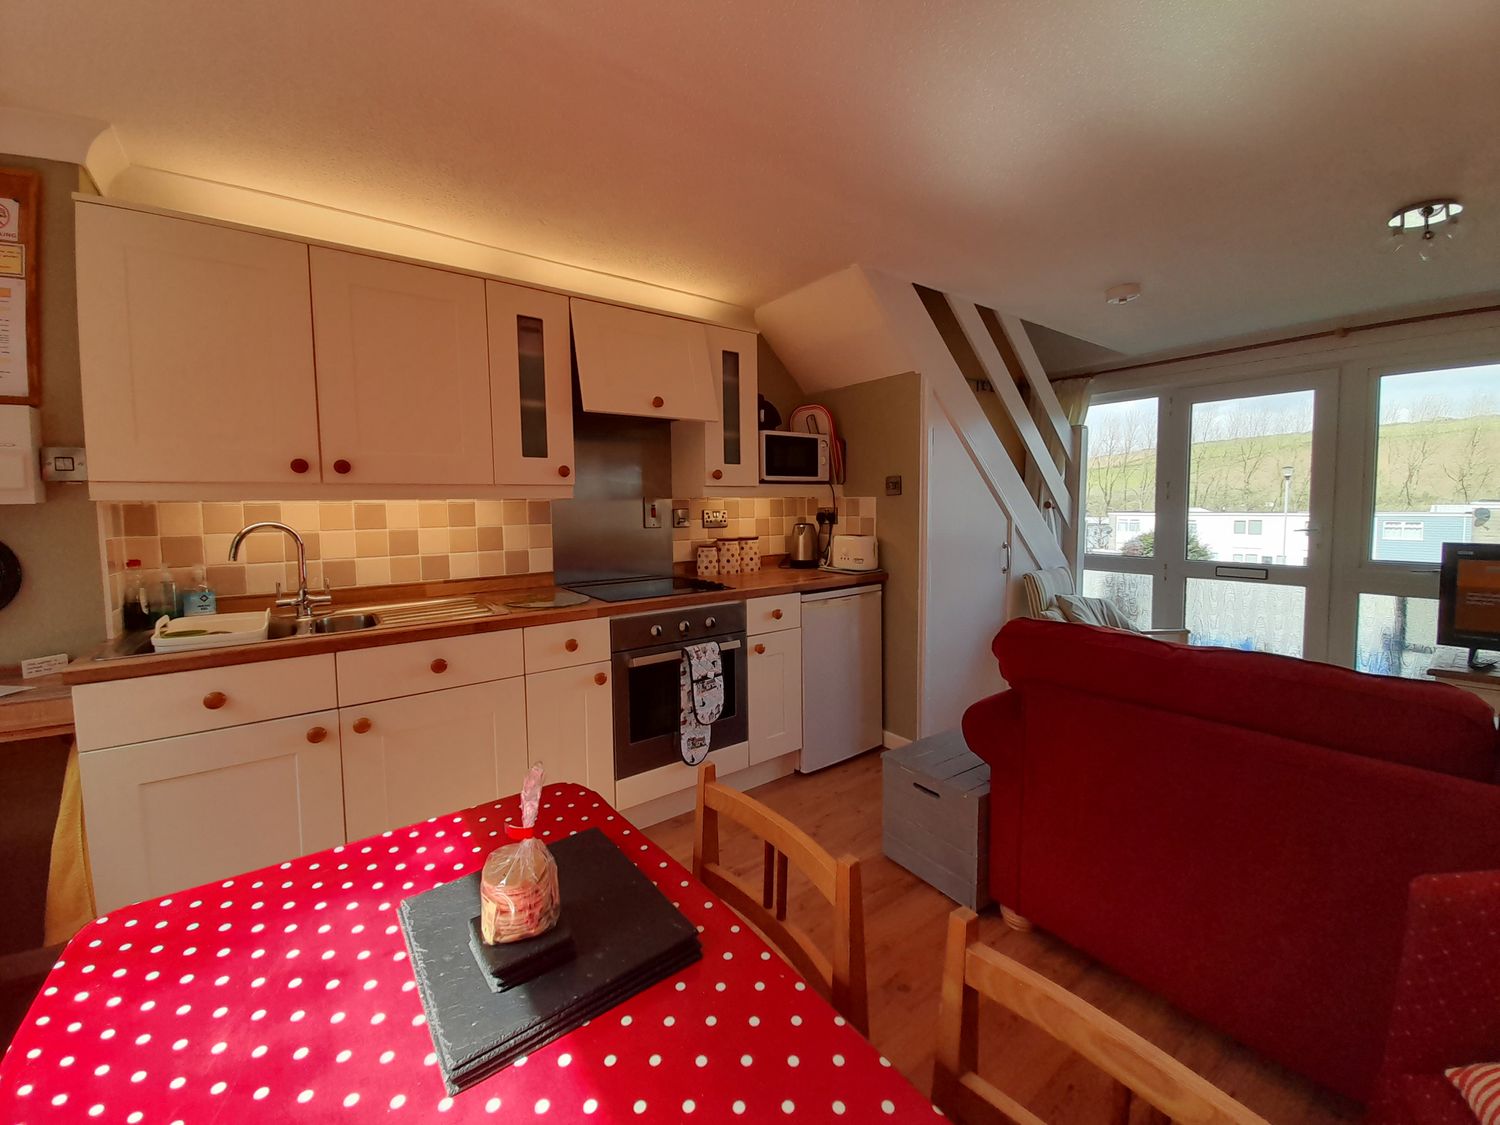 34 Freshwater Bay - South Wales - 1035504 - photo 1